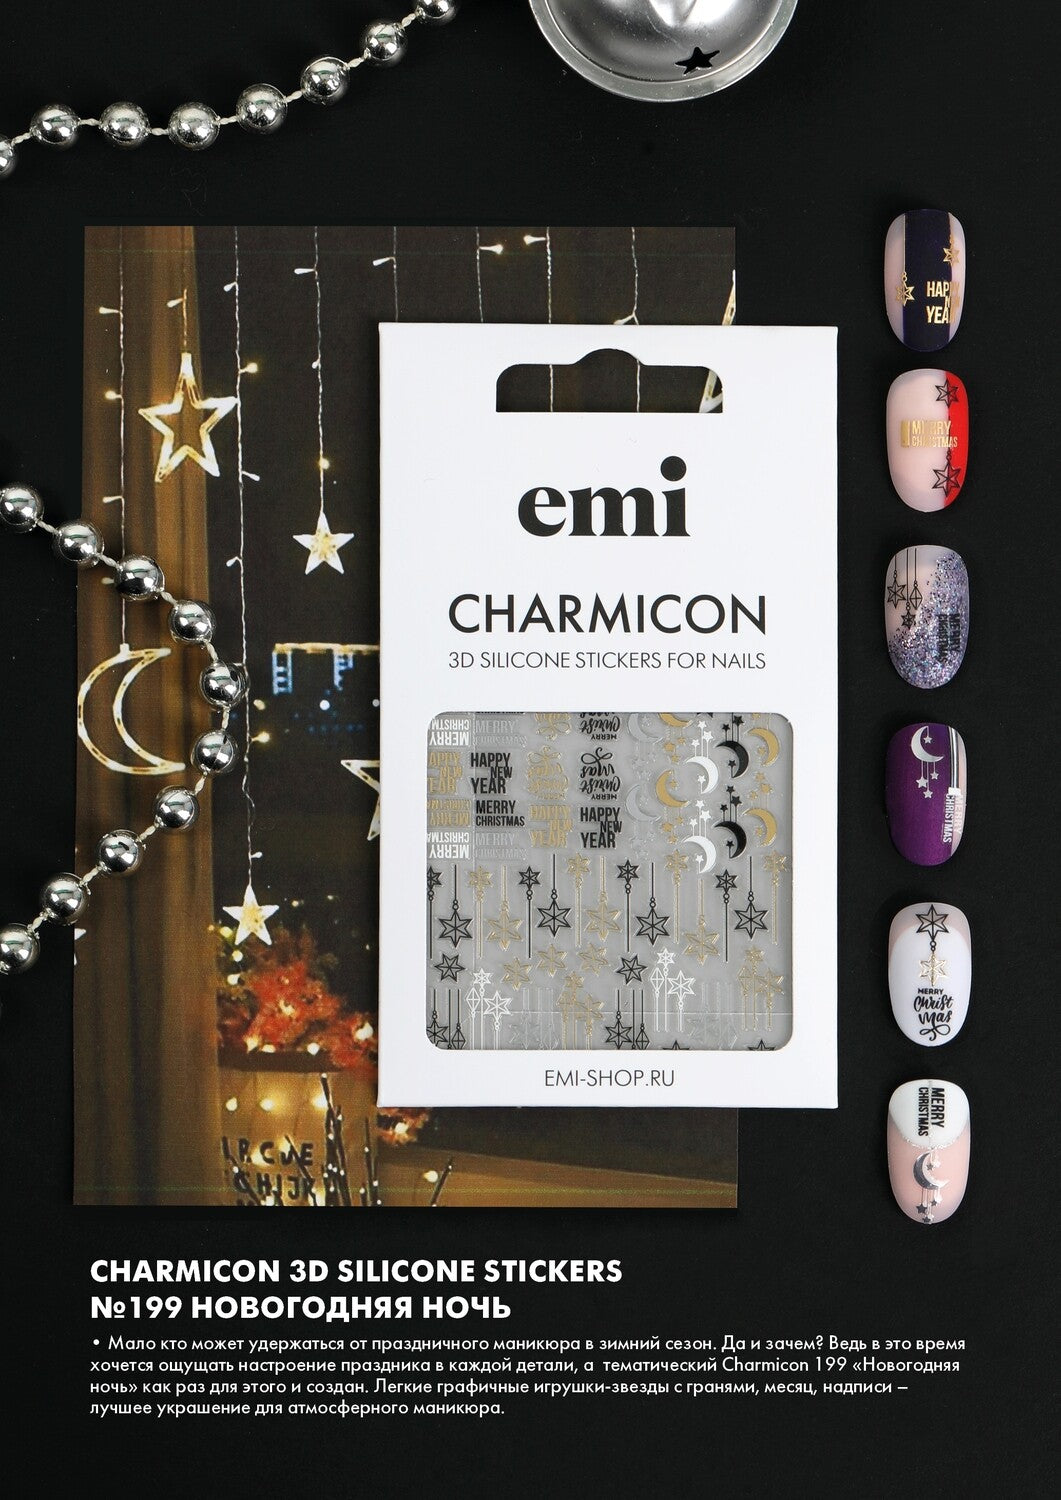 Charmicon 3D Silicone Stickers No. 199 Christmas Night